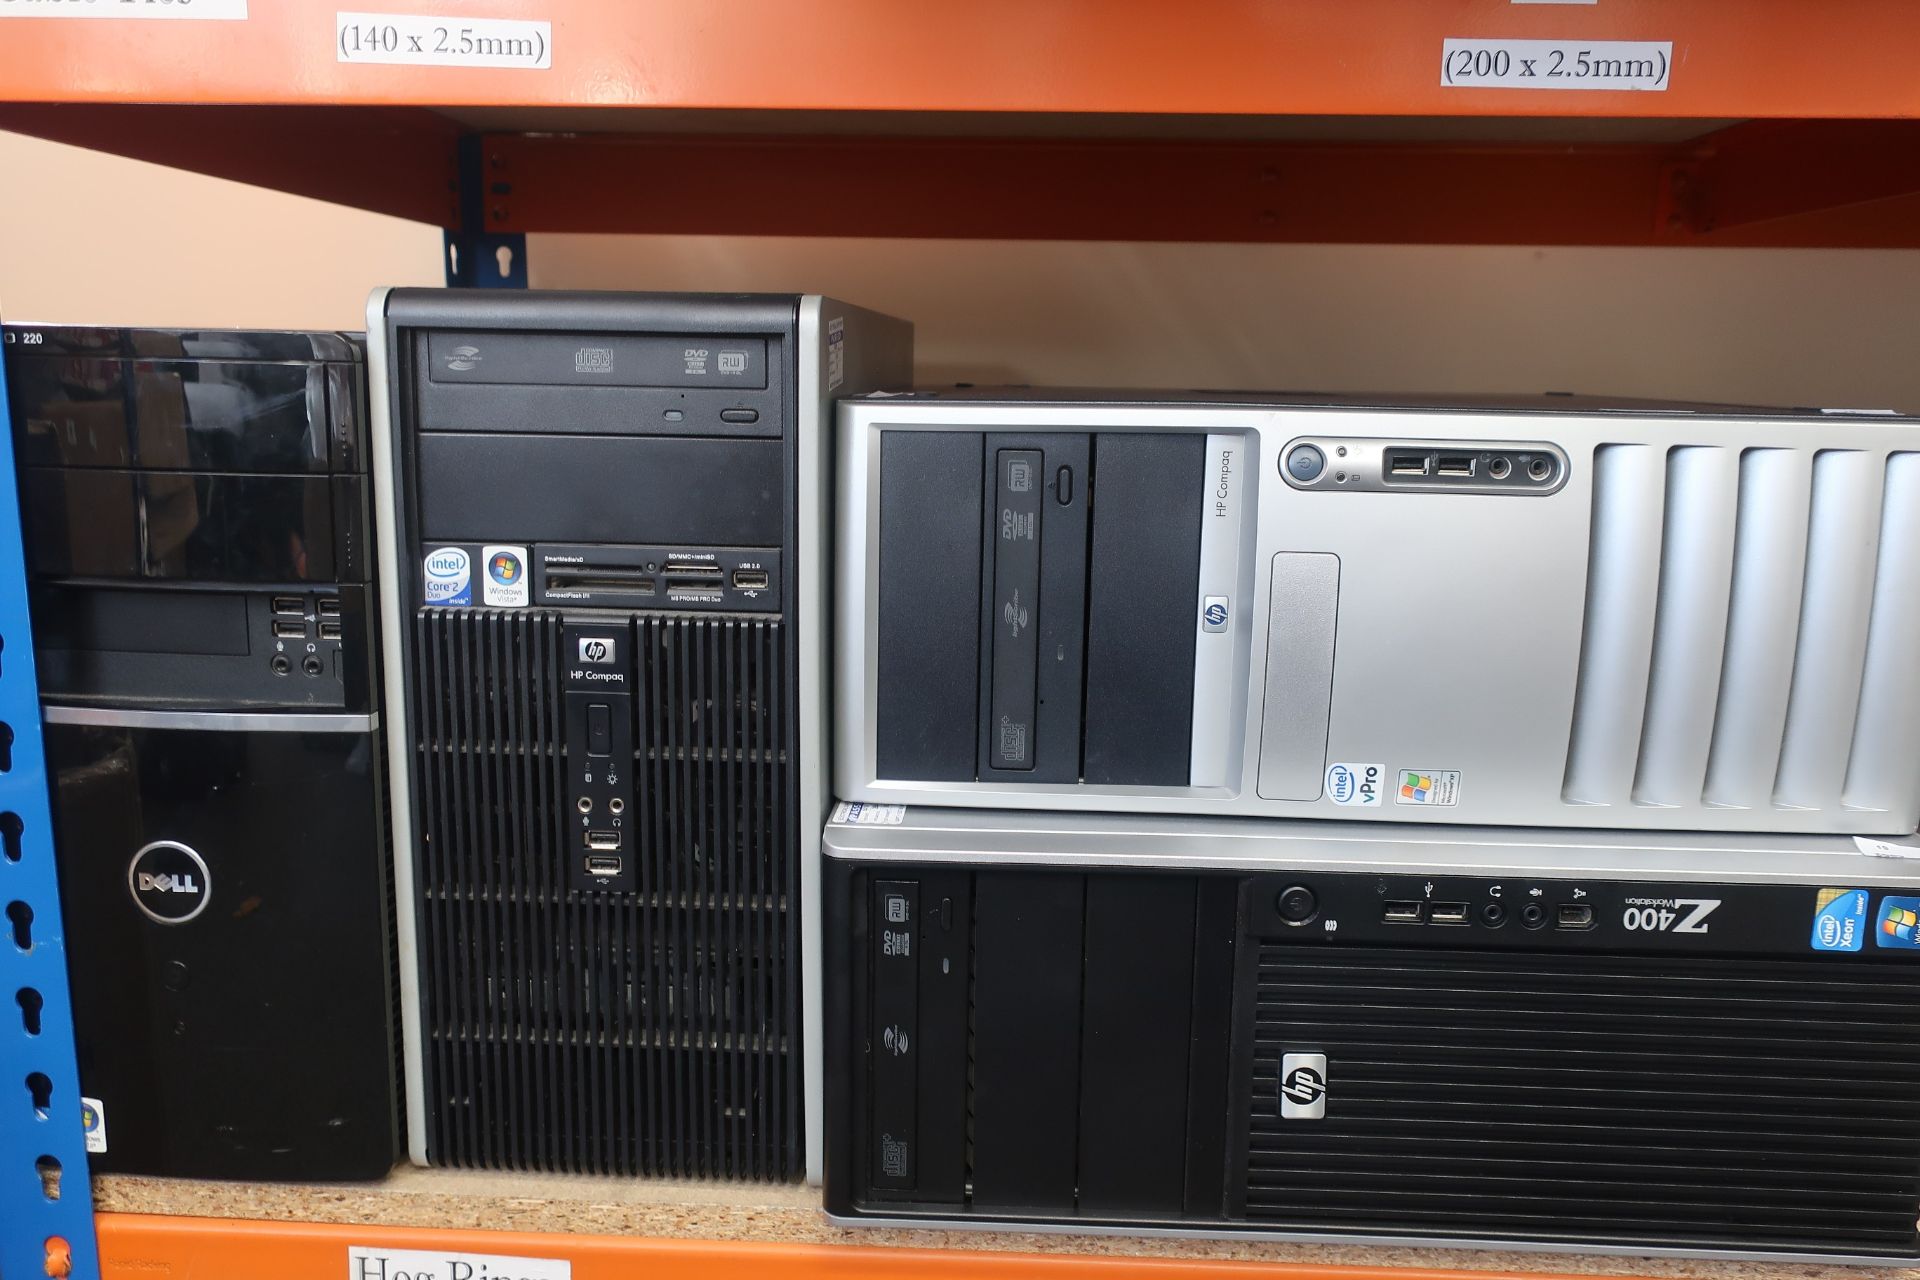 A pre-owned Dell Vostro 220 Minitower, an HP Compaq DC5700 Microtower, an HP Z400 Workstation and an